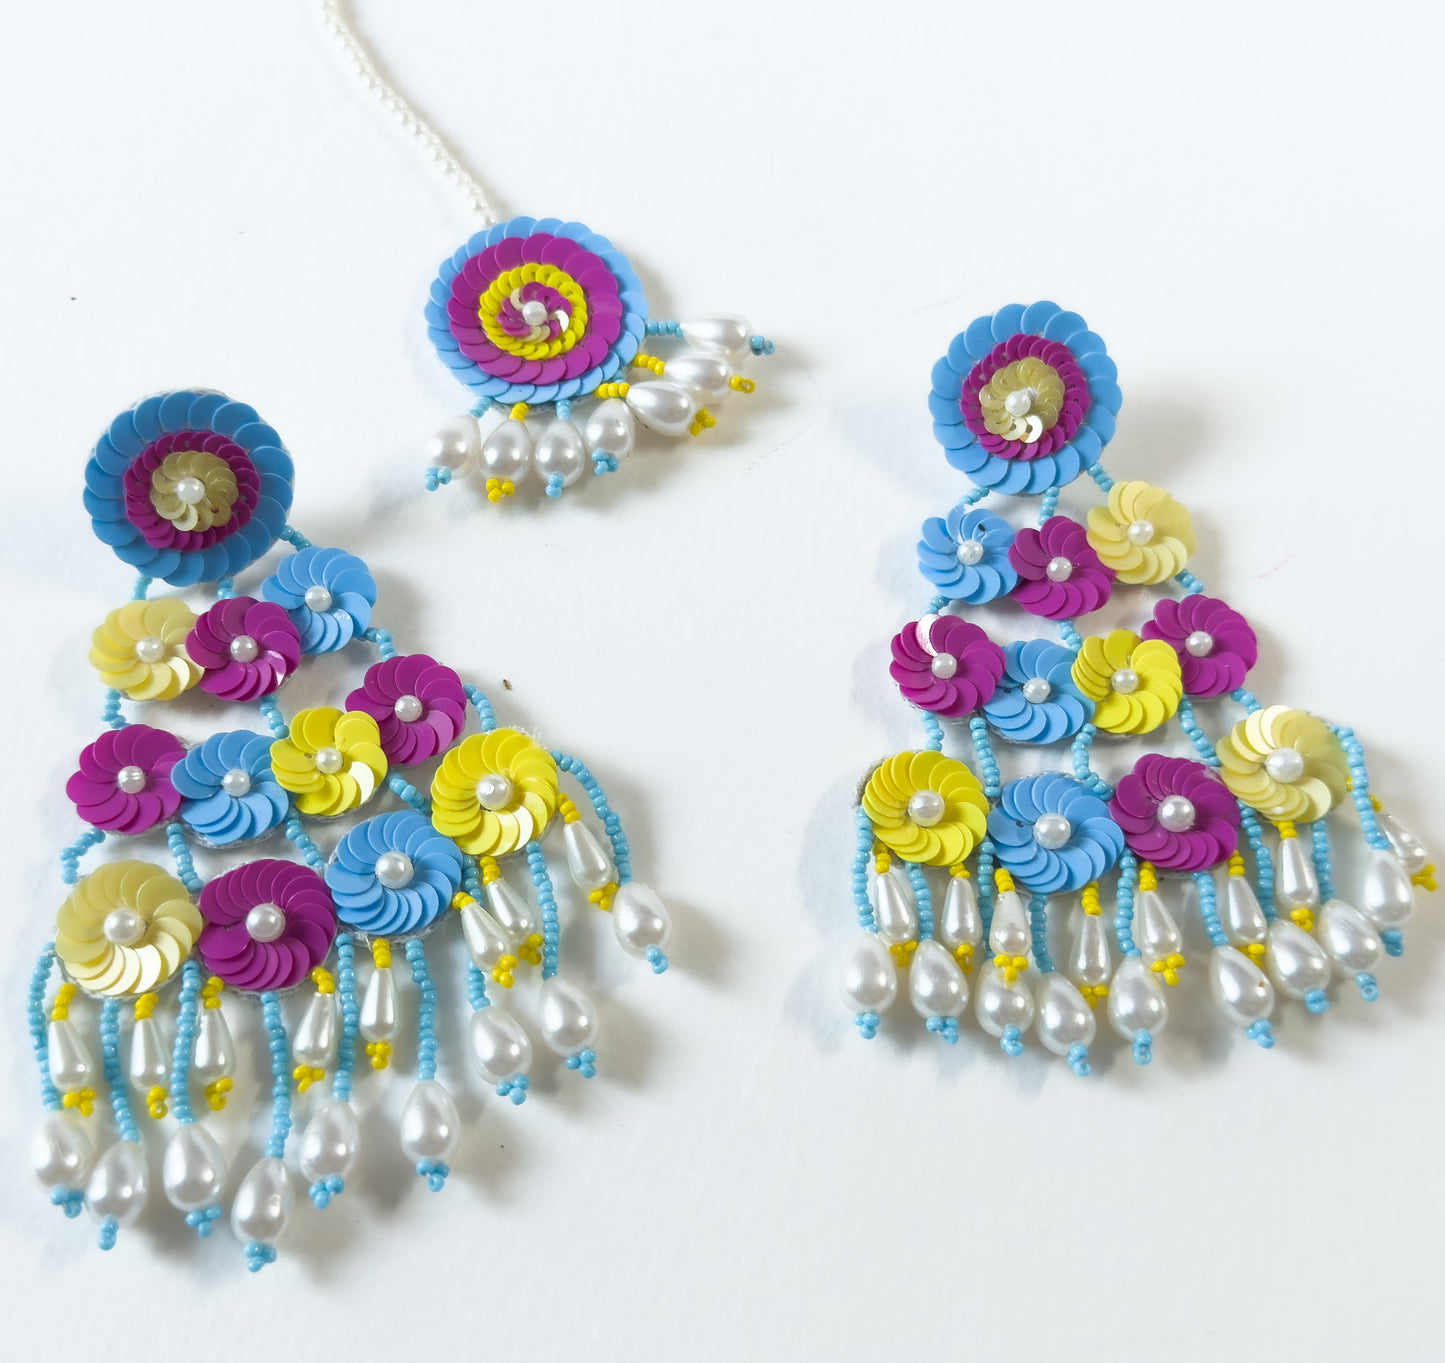 Vibrant Handmade Beaded Jewelry Set with Floral and Spiral Designs set